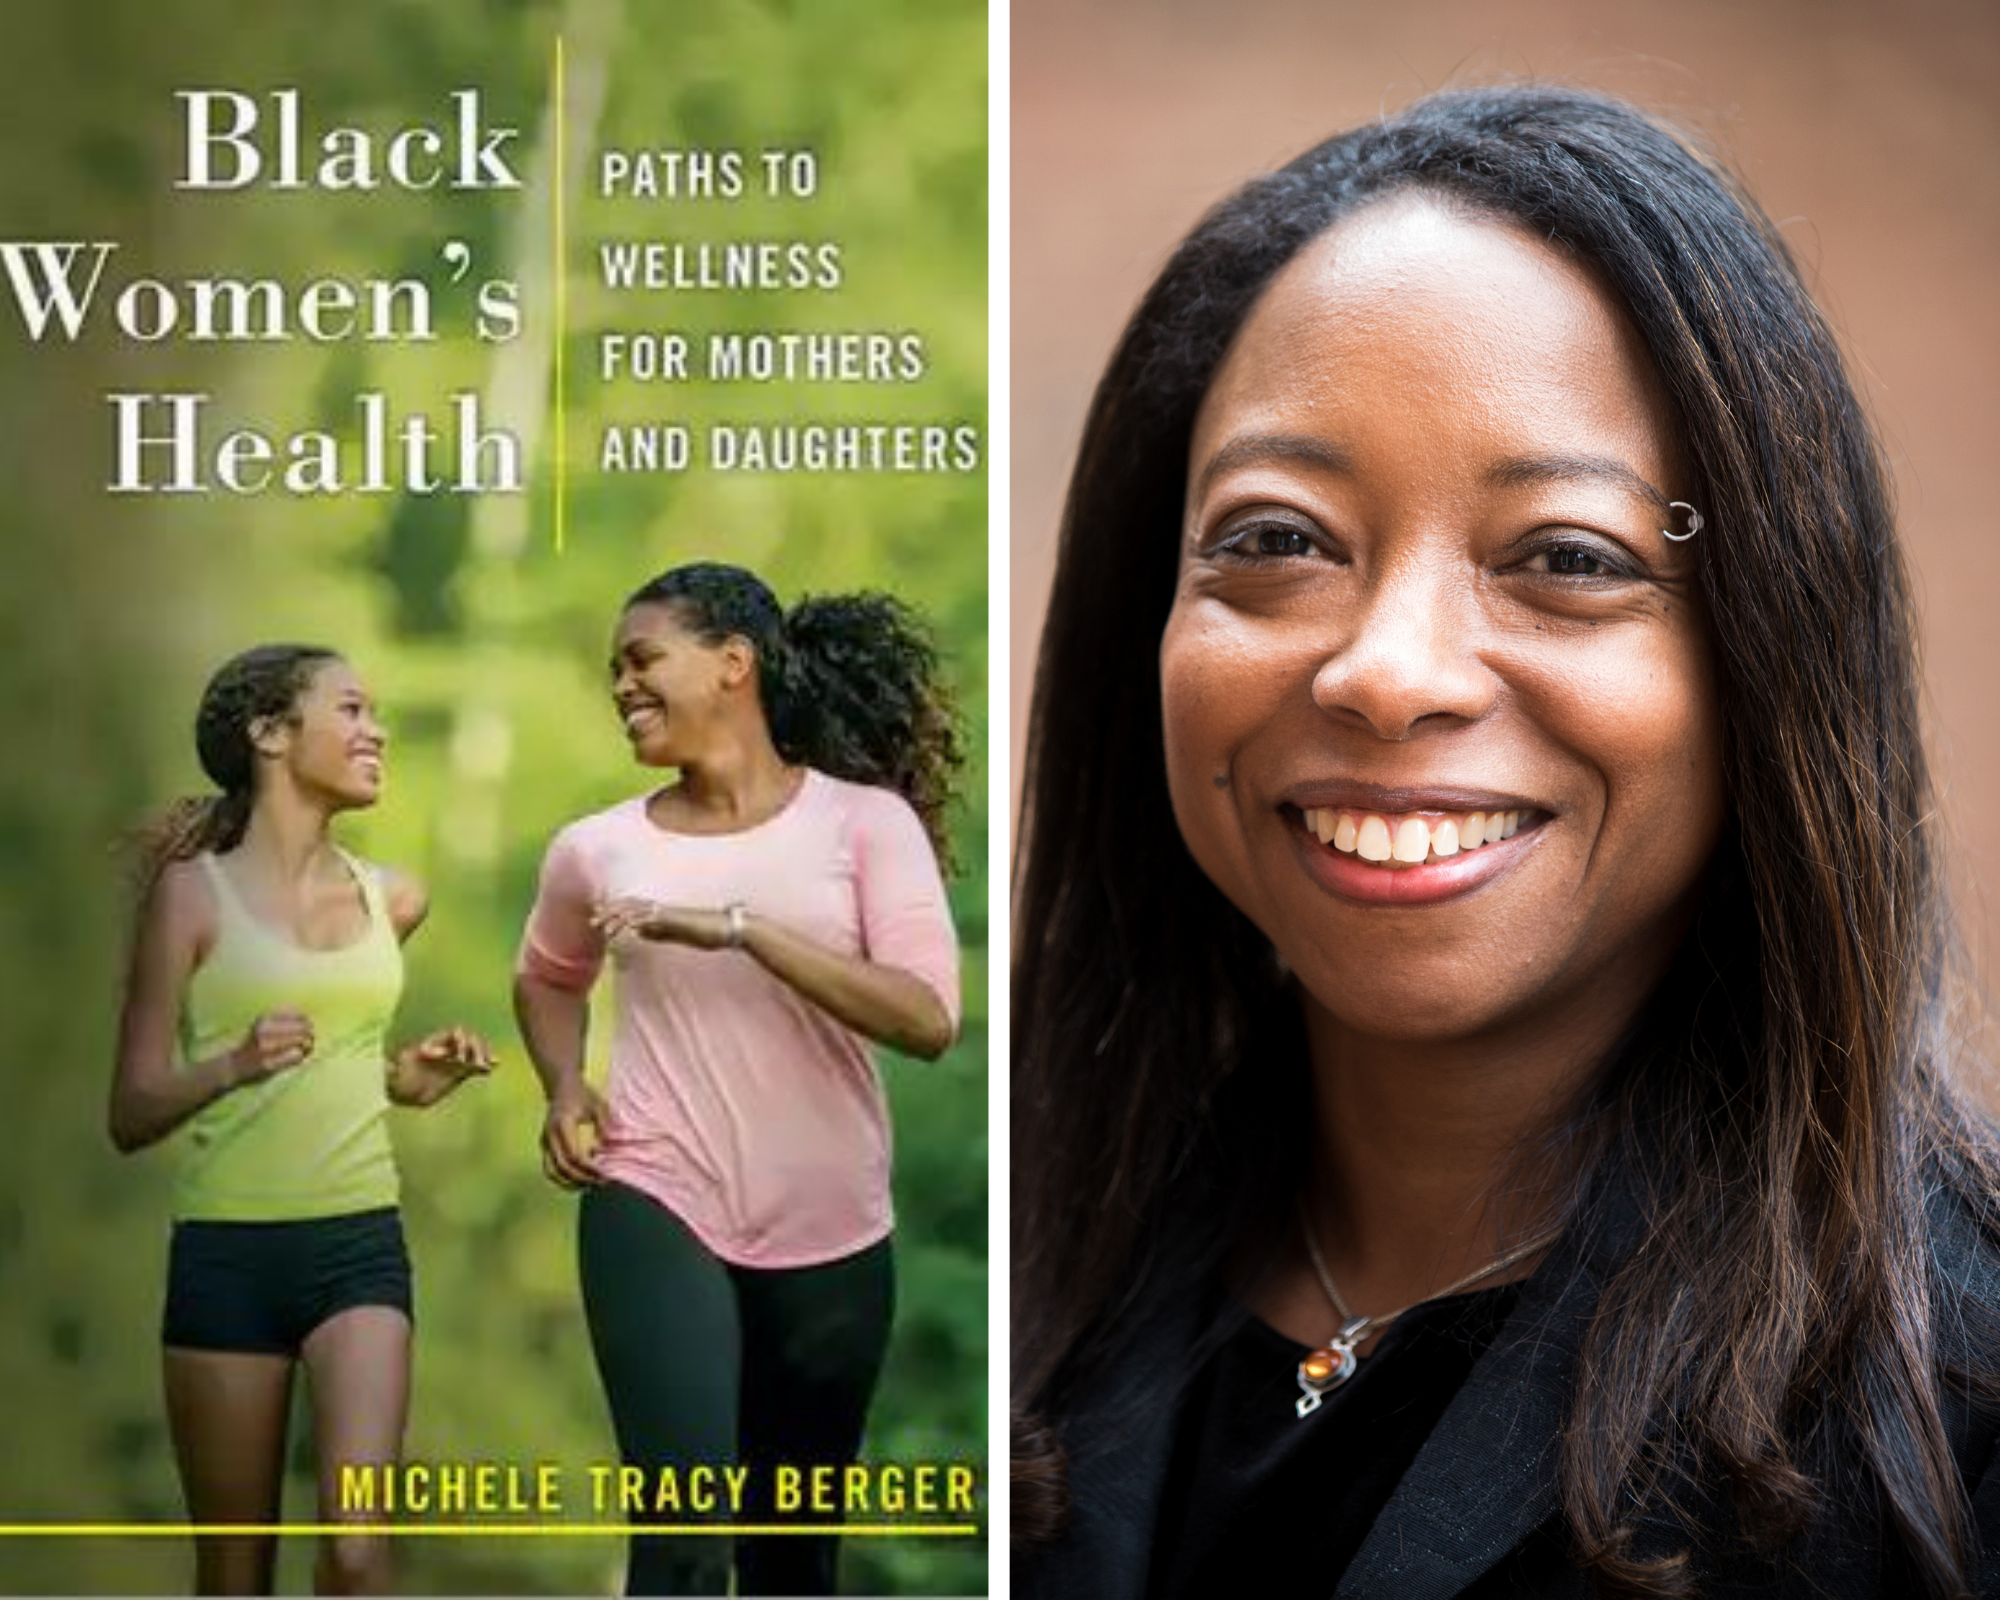 On left: book cover of Berger book; on right photo of Michele Berger